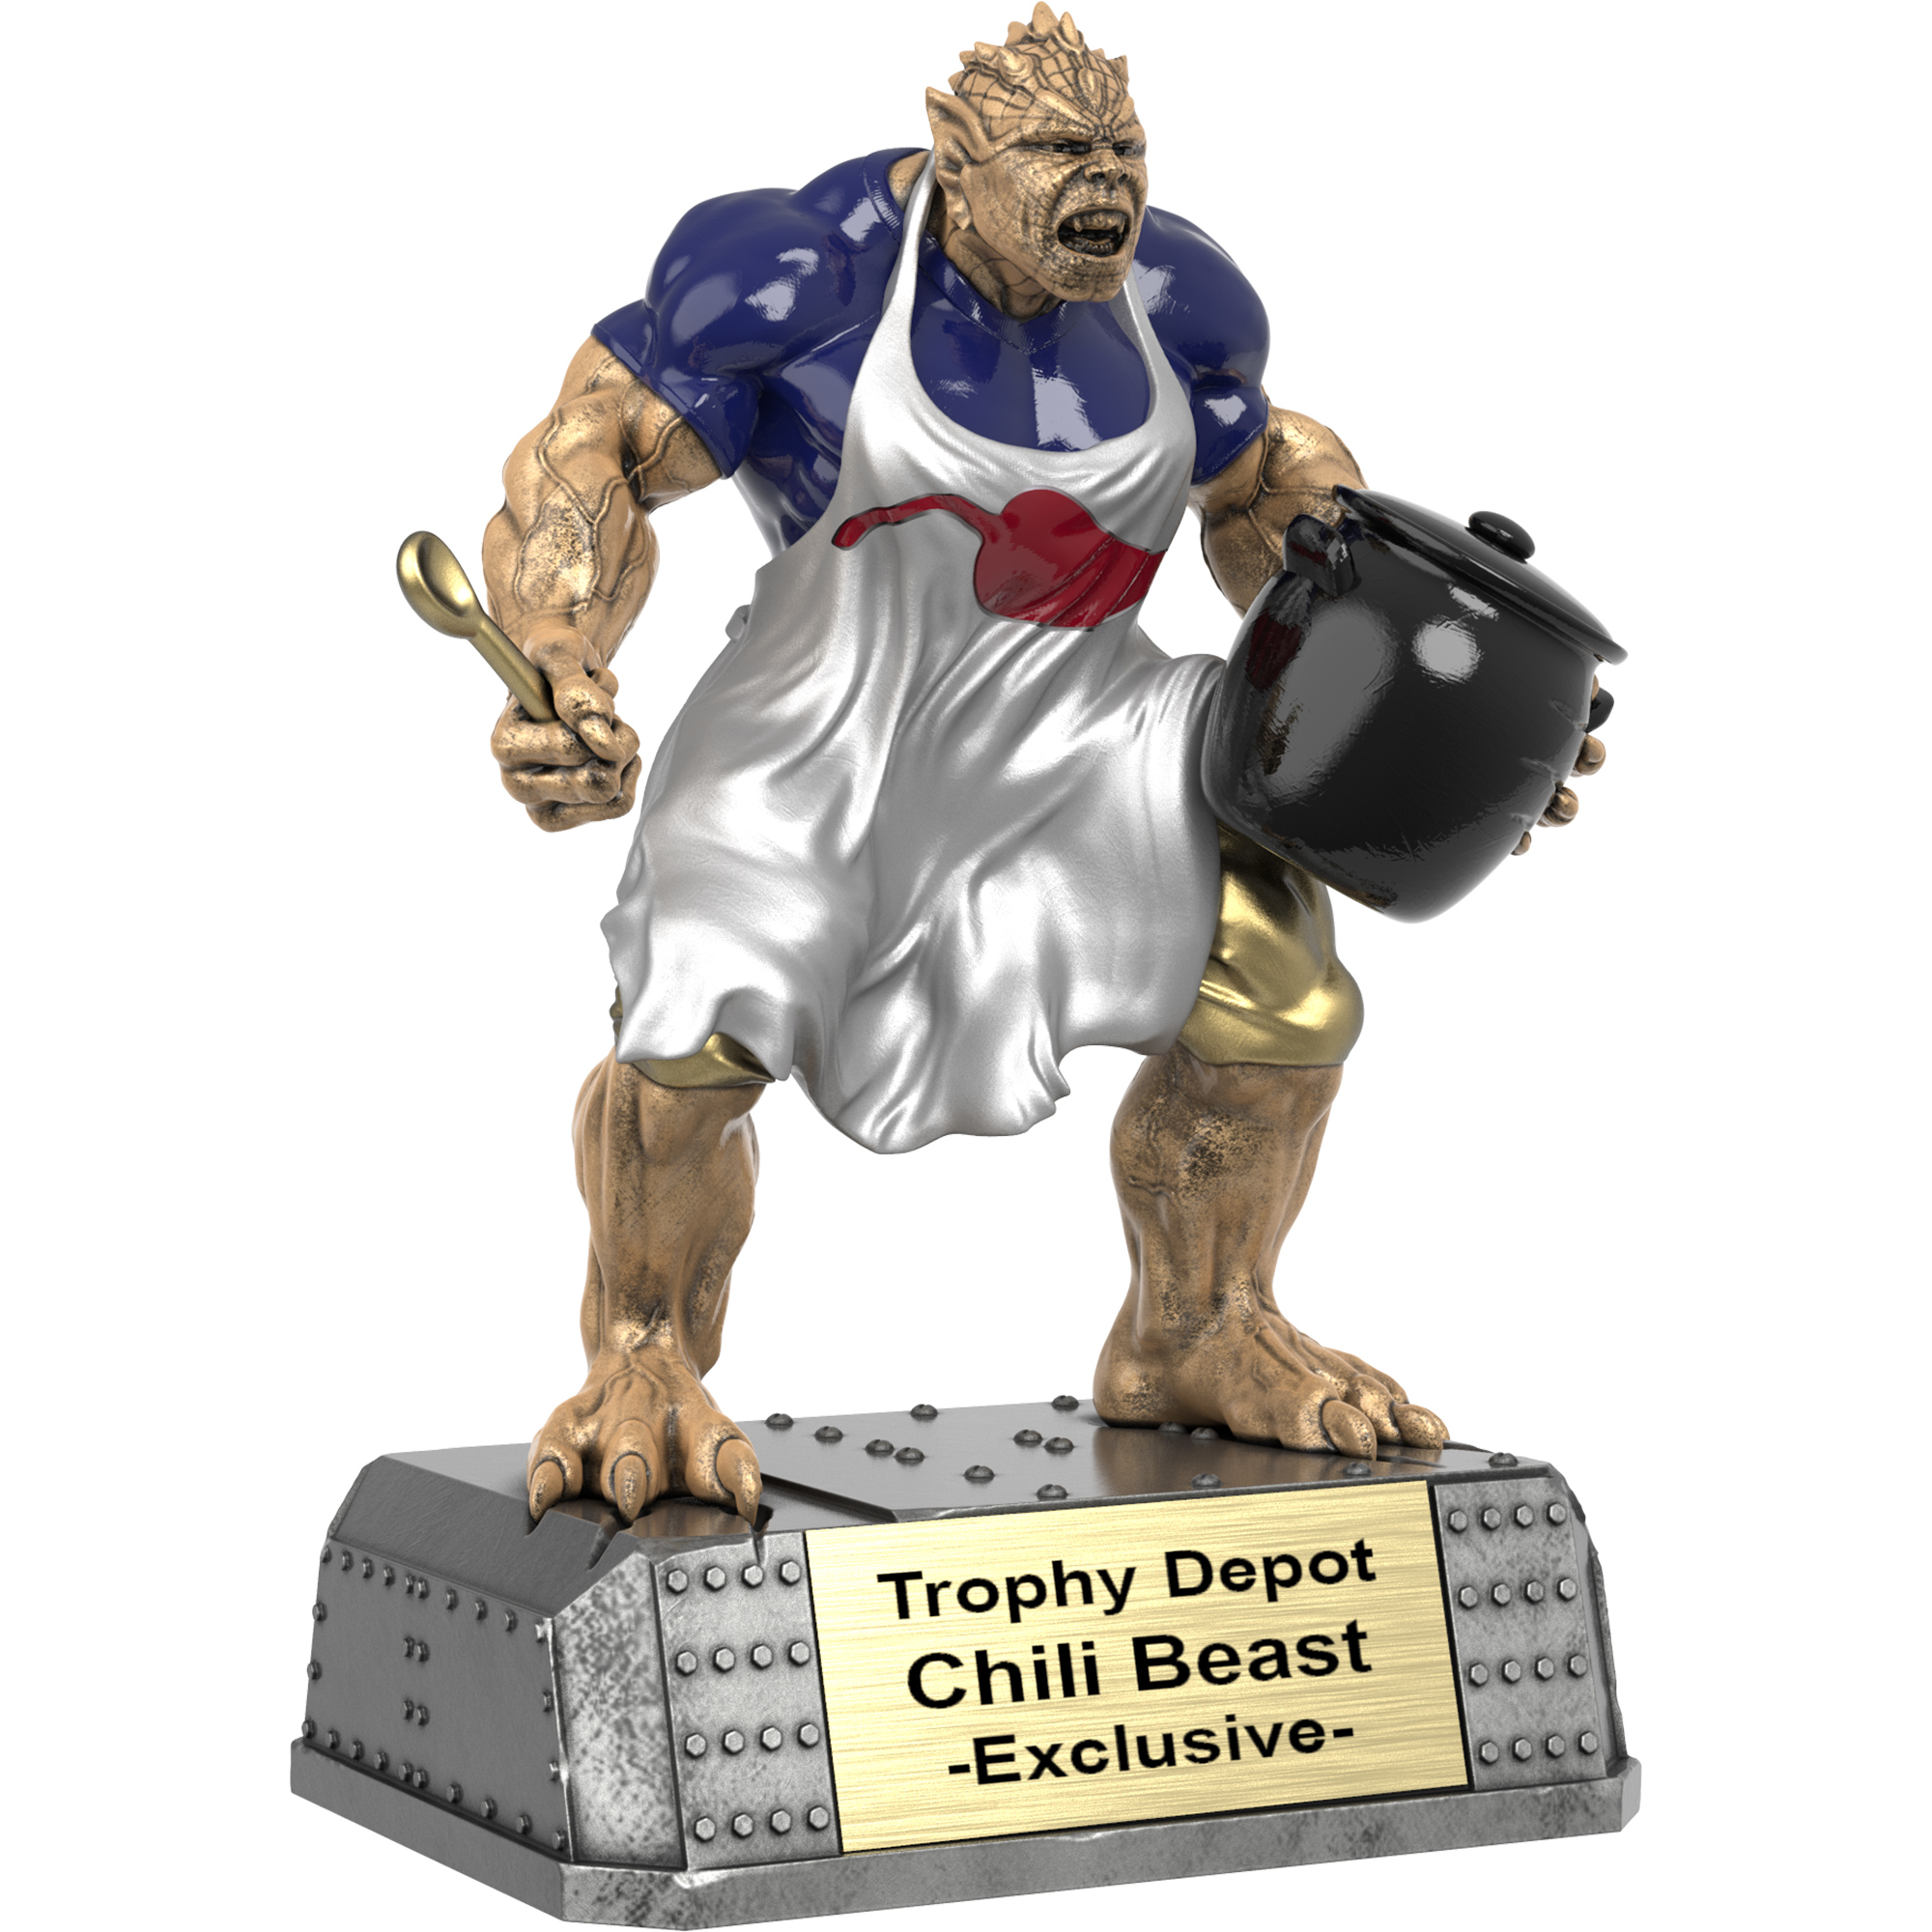 Chili Cook Beast, Monster Sculpture Trophy - 6.75 inch